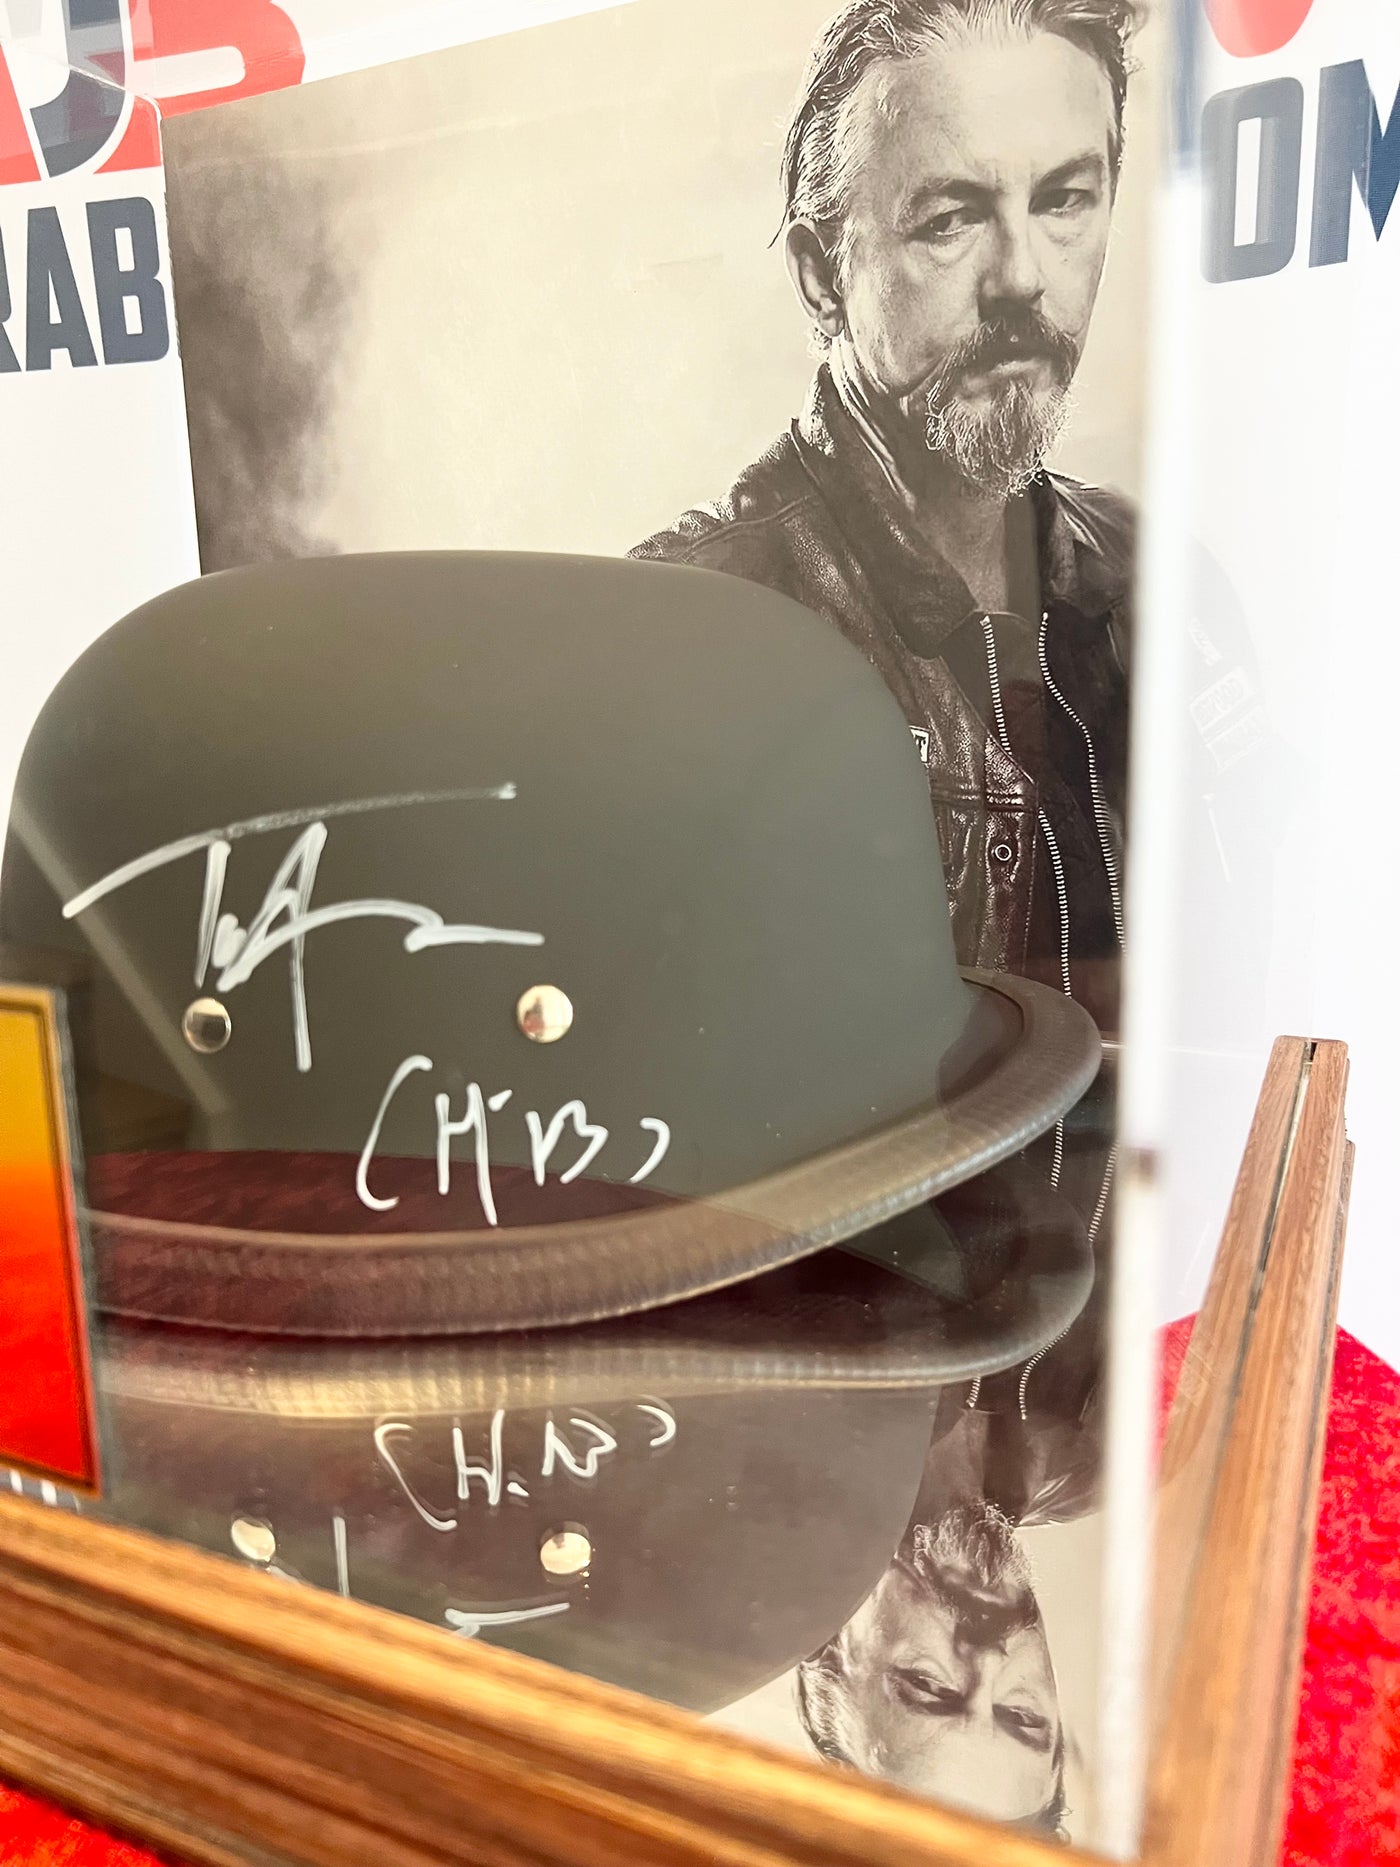 Tommy Flanagan Signed Sons of Anarchy Biker Helmut Inscribed Chibs COA